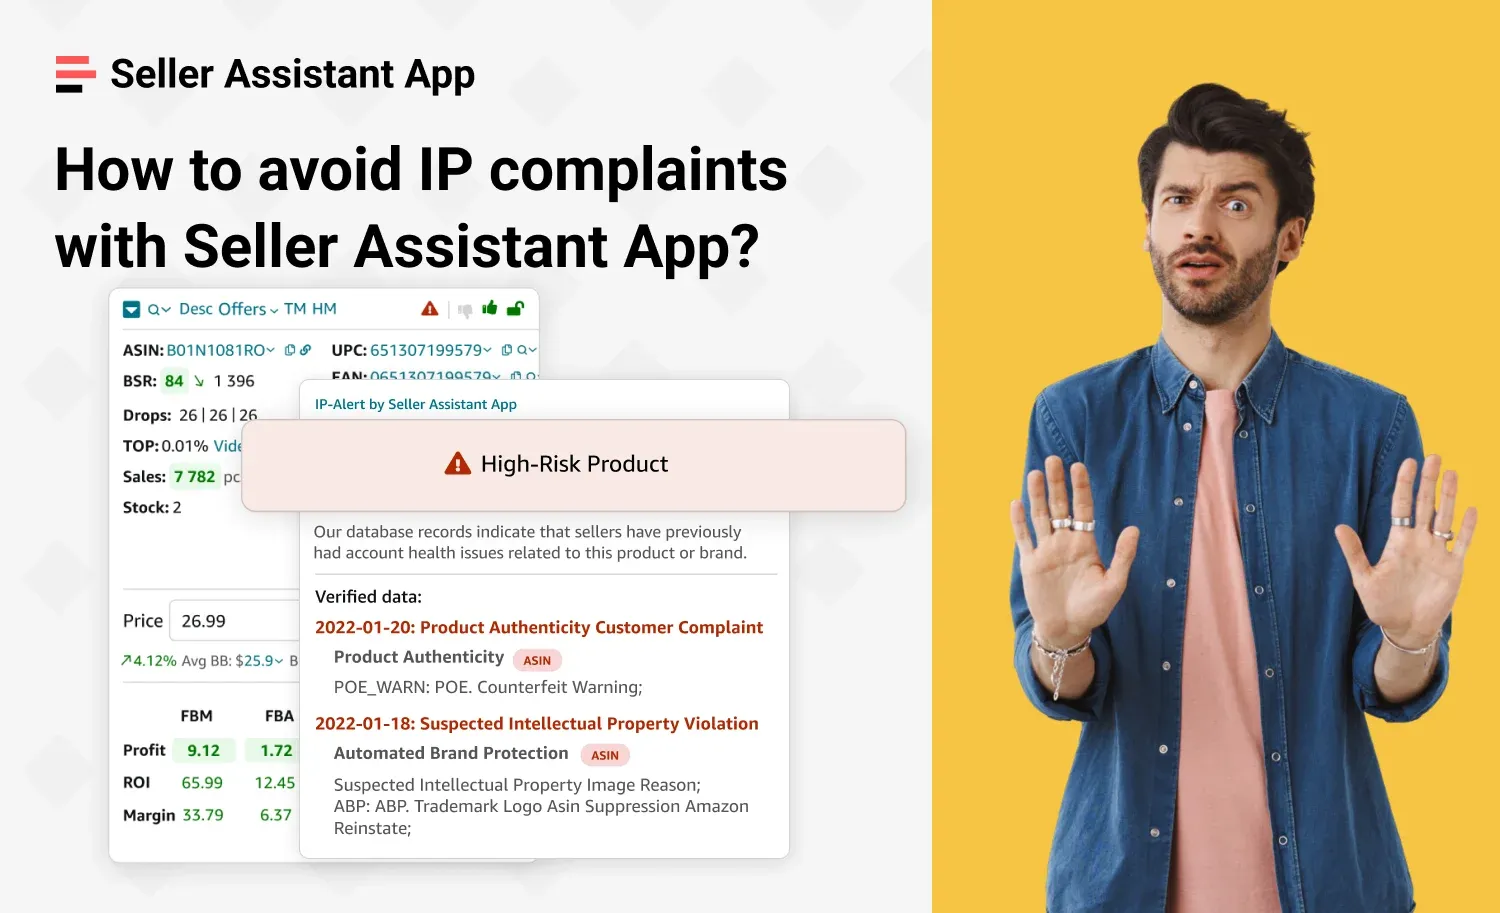 How to Avoid IP Complaints with Seller Assistant App